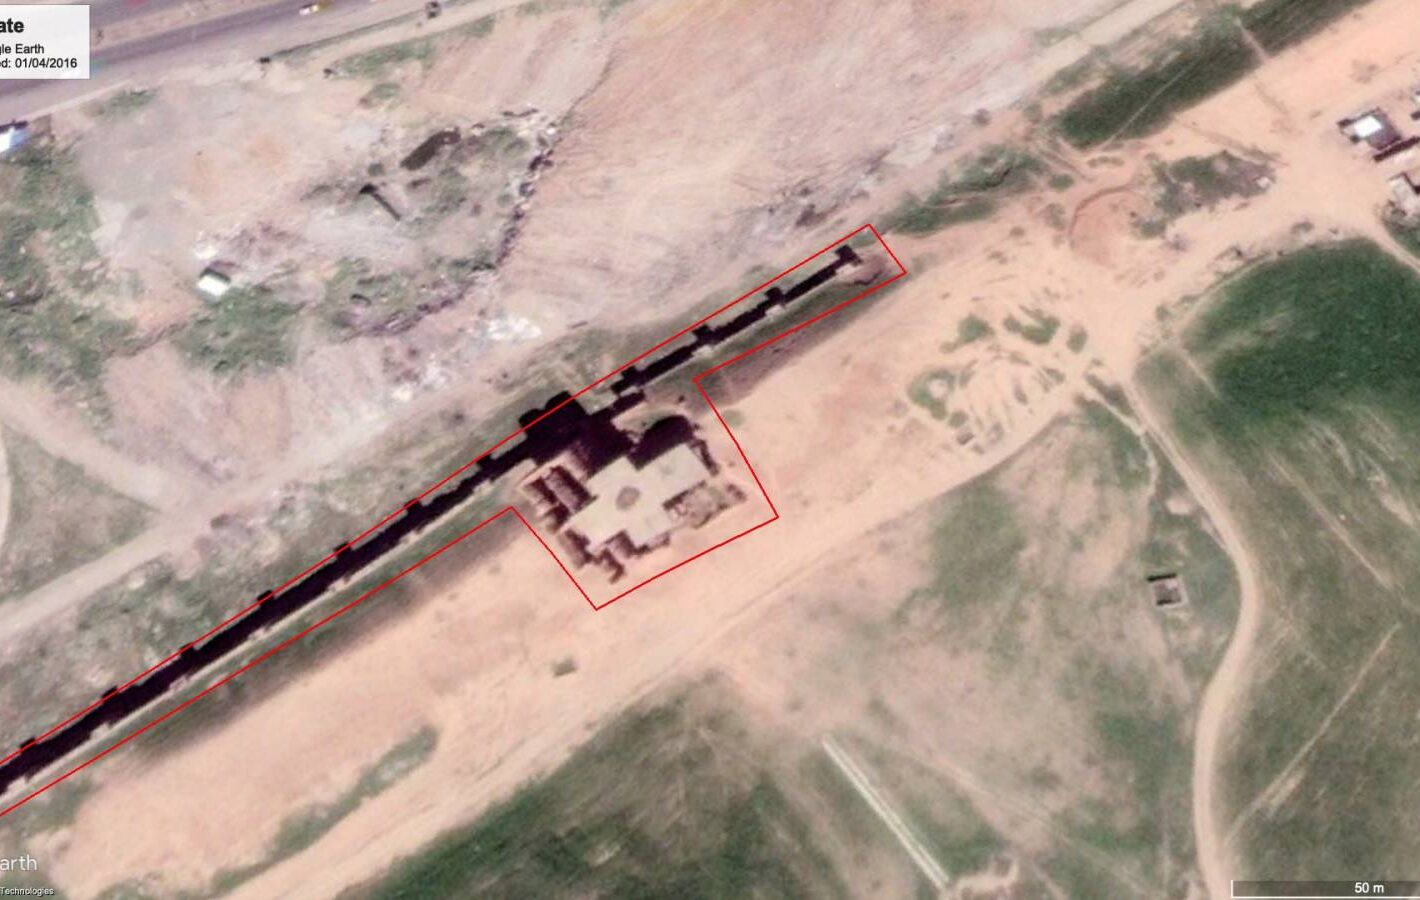 Satellite image of the Adad Gate in Nineveh, Iraq